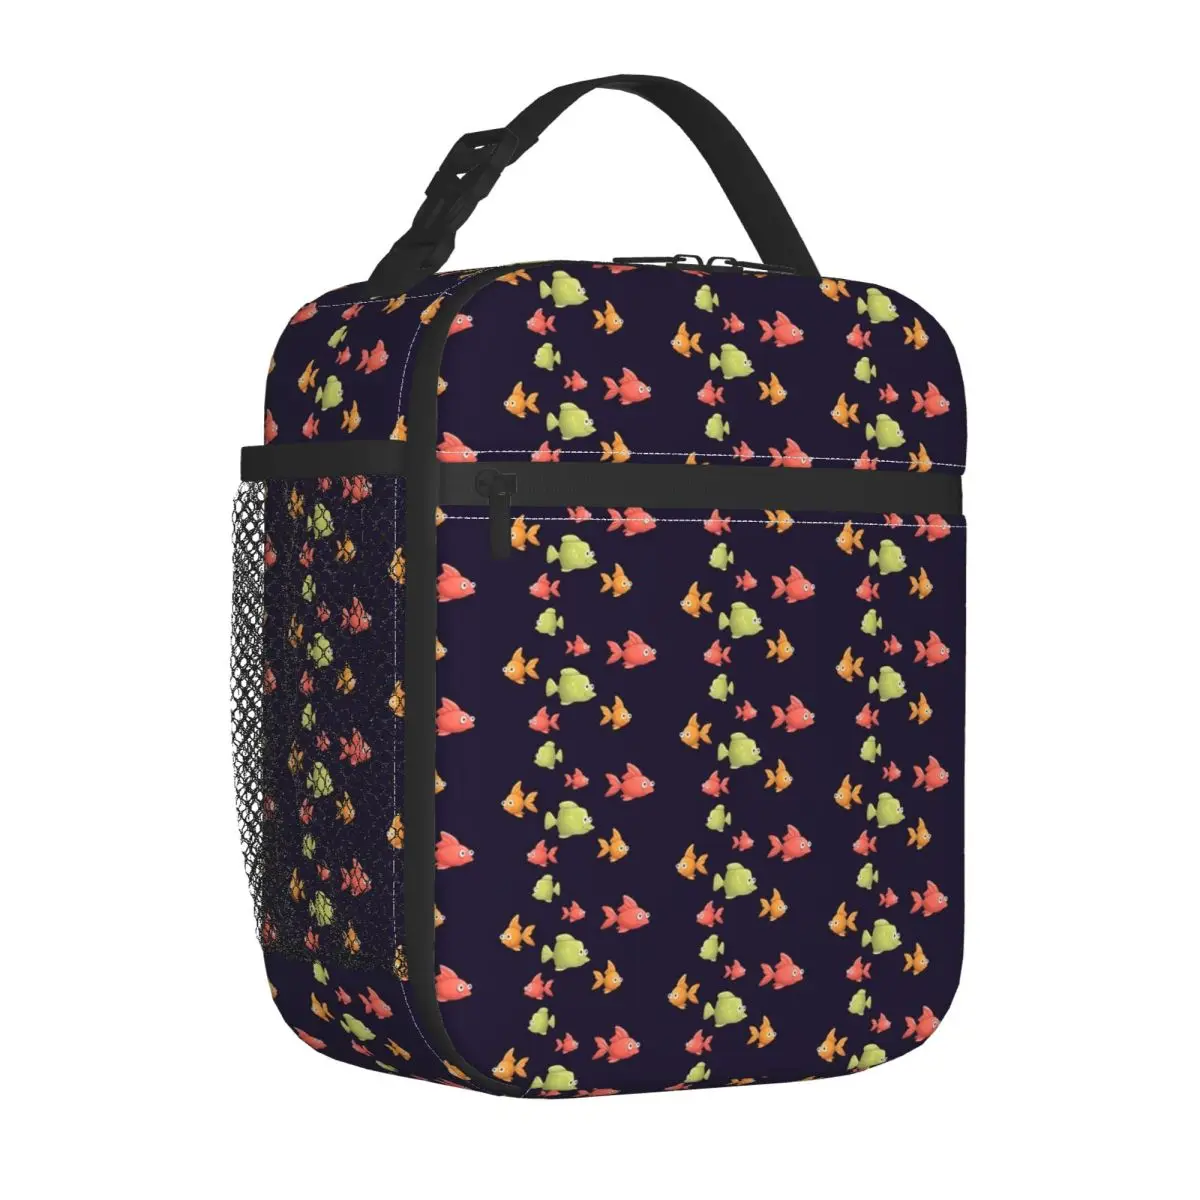 

Tropical Marine Lunch Bag Colorful Fishes Print Work Lunch Box For Women Leisure Print Thermal Tote Handbags Oxford Cooler Bag